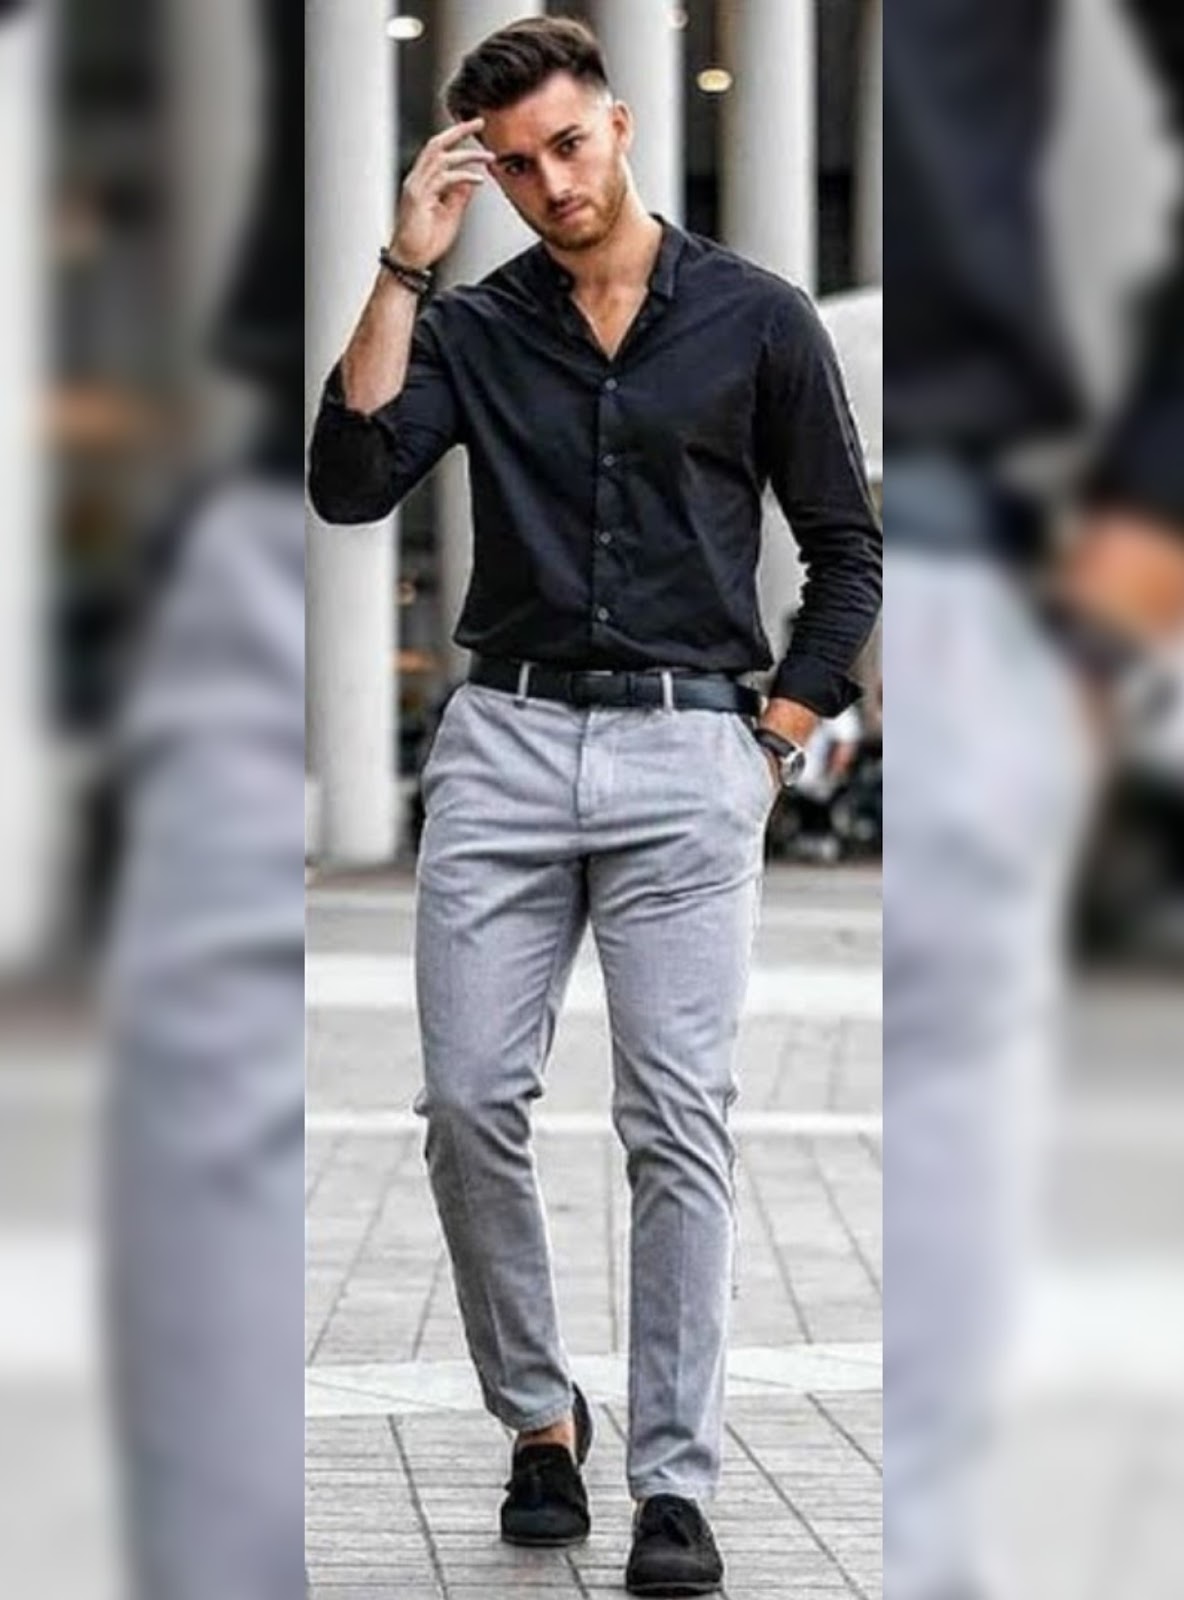 What Color Jeans To Wear With A Black Shirt? - DapperClan